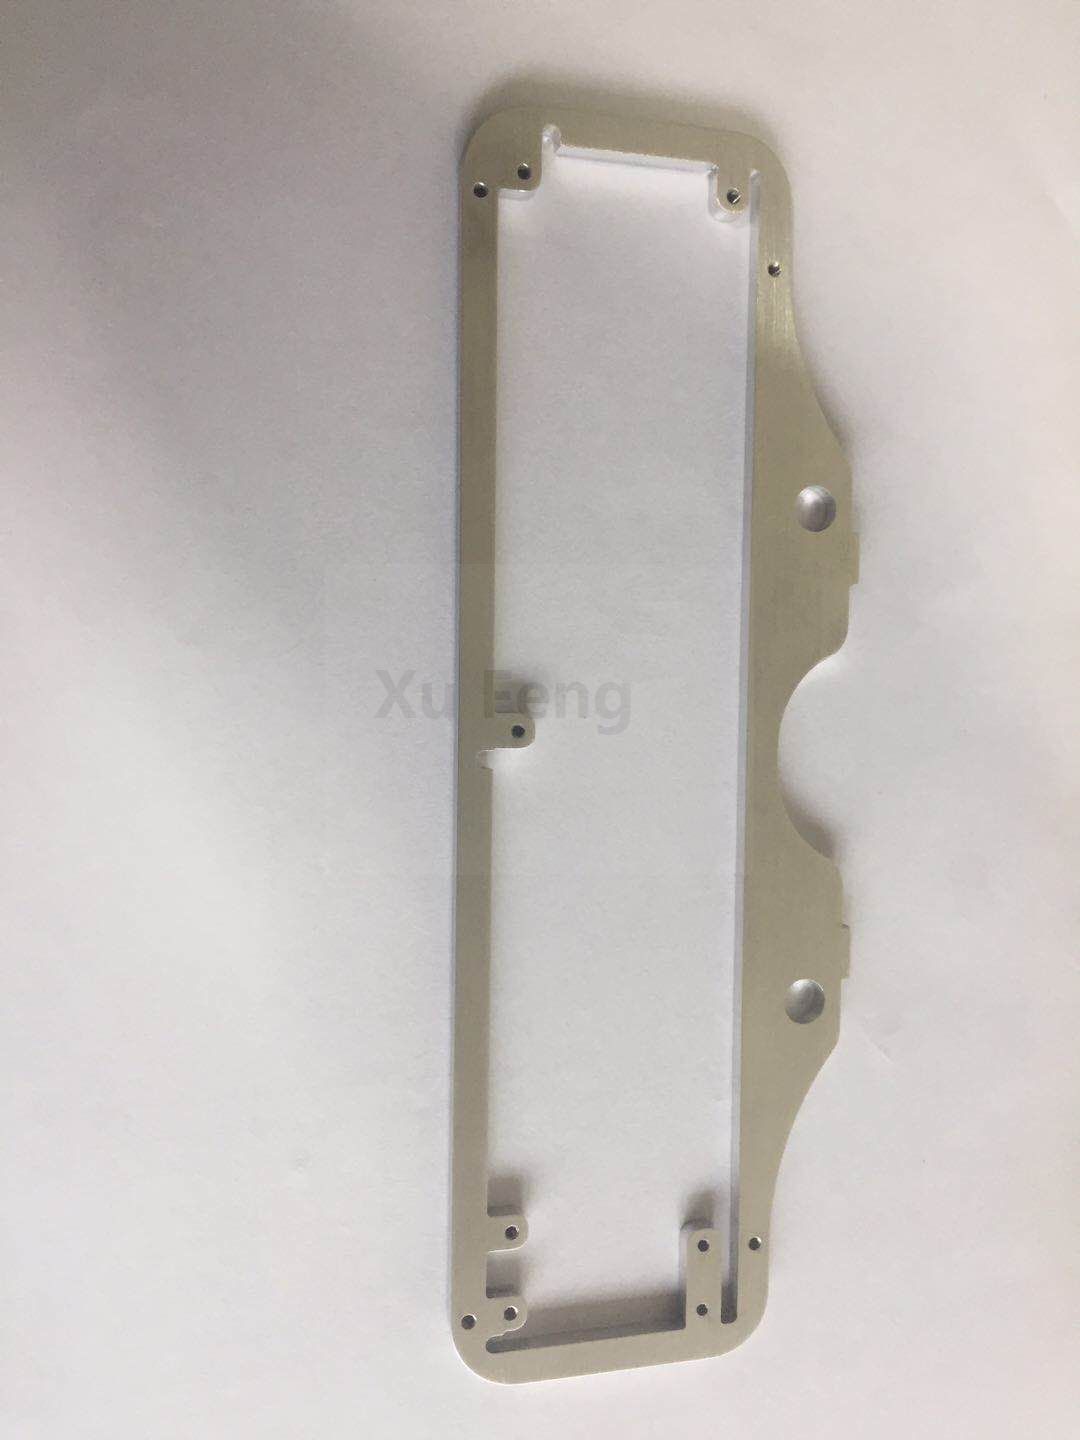 custom milling metal frame parts,CNC Milling Part.This type of service allows customers to design and produce metal frame parts to their exact specifications. The CNC Milling Part can be machined to a variety of shapes and sizes and can be used in a varie